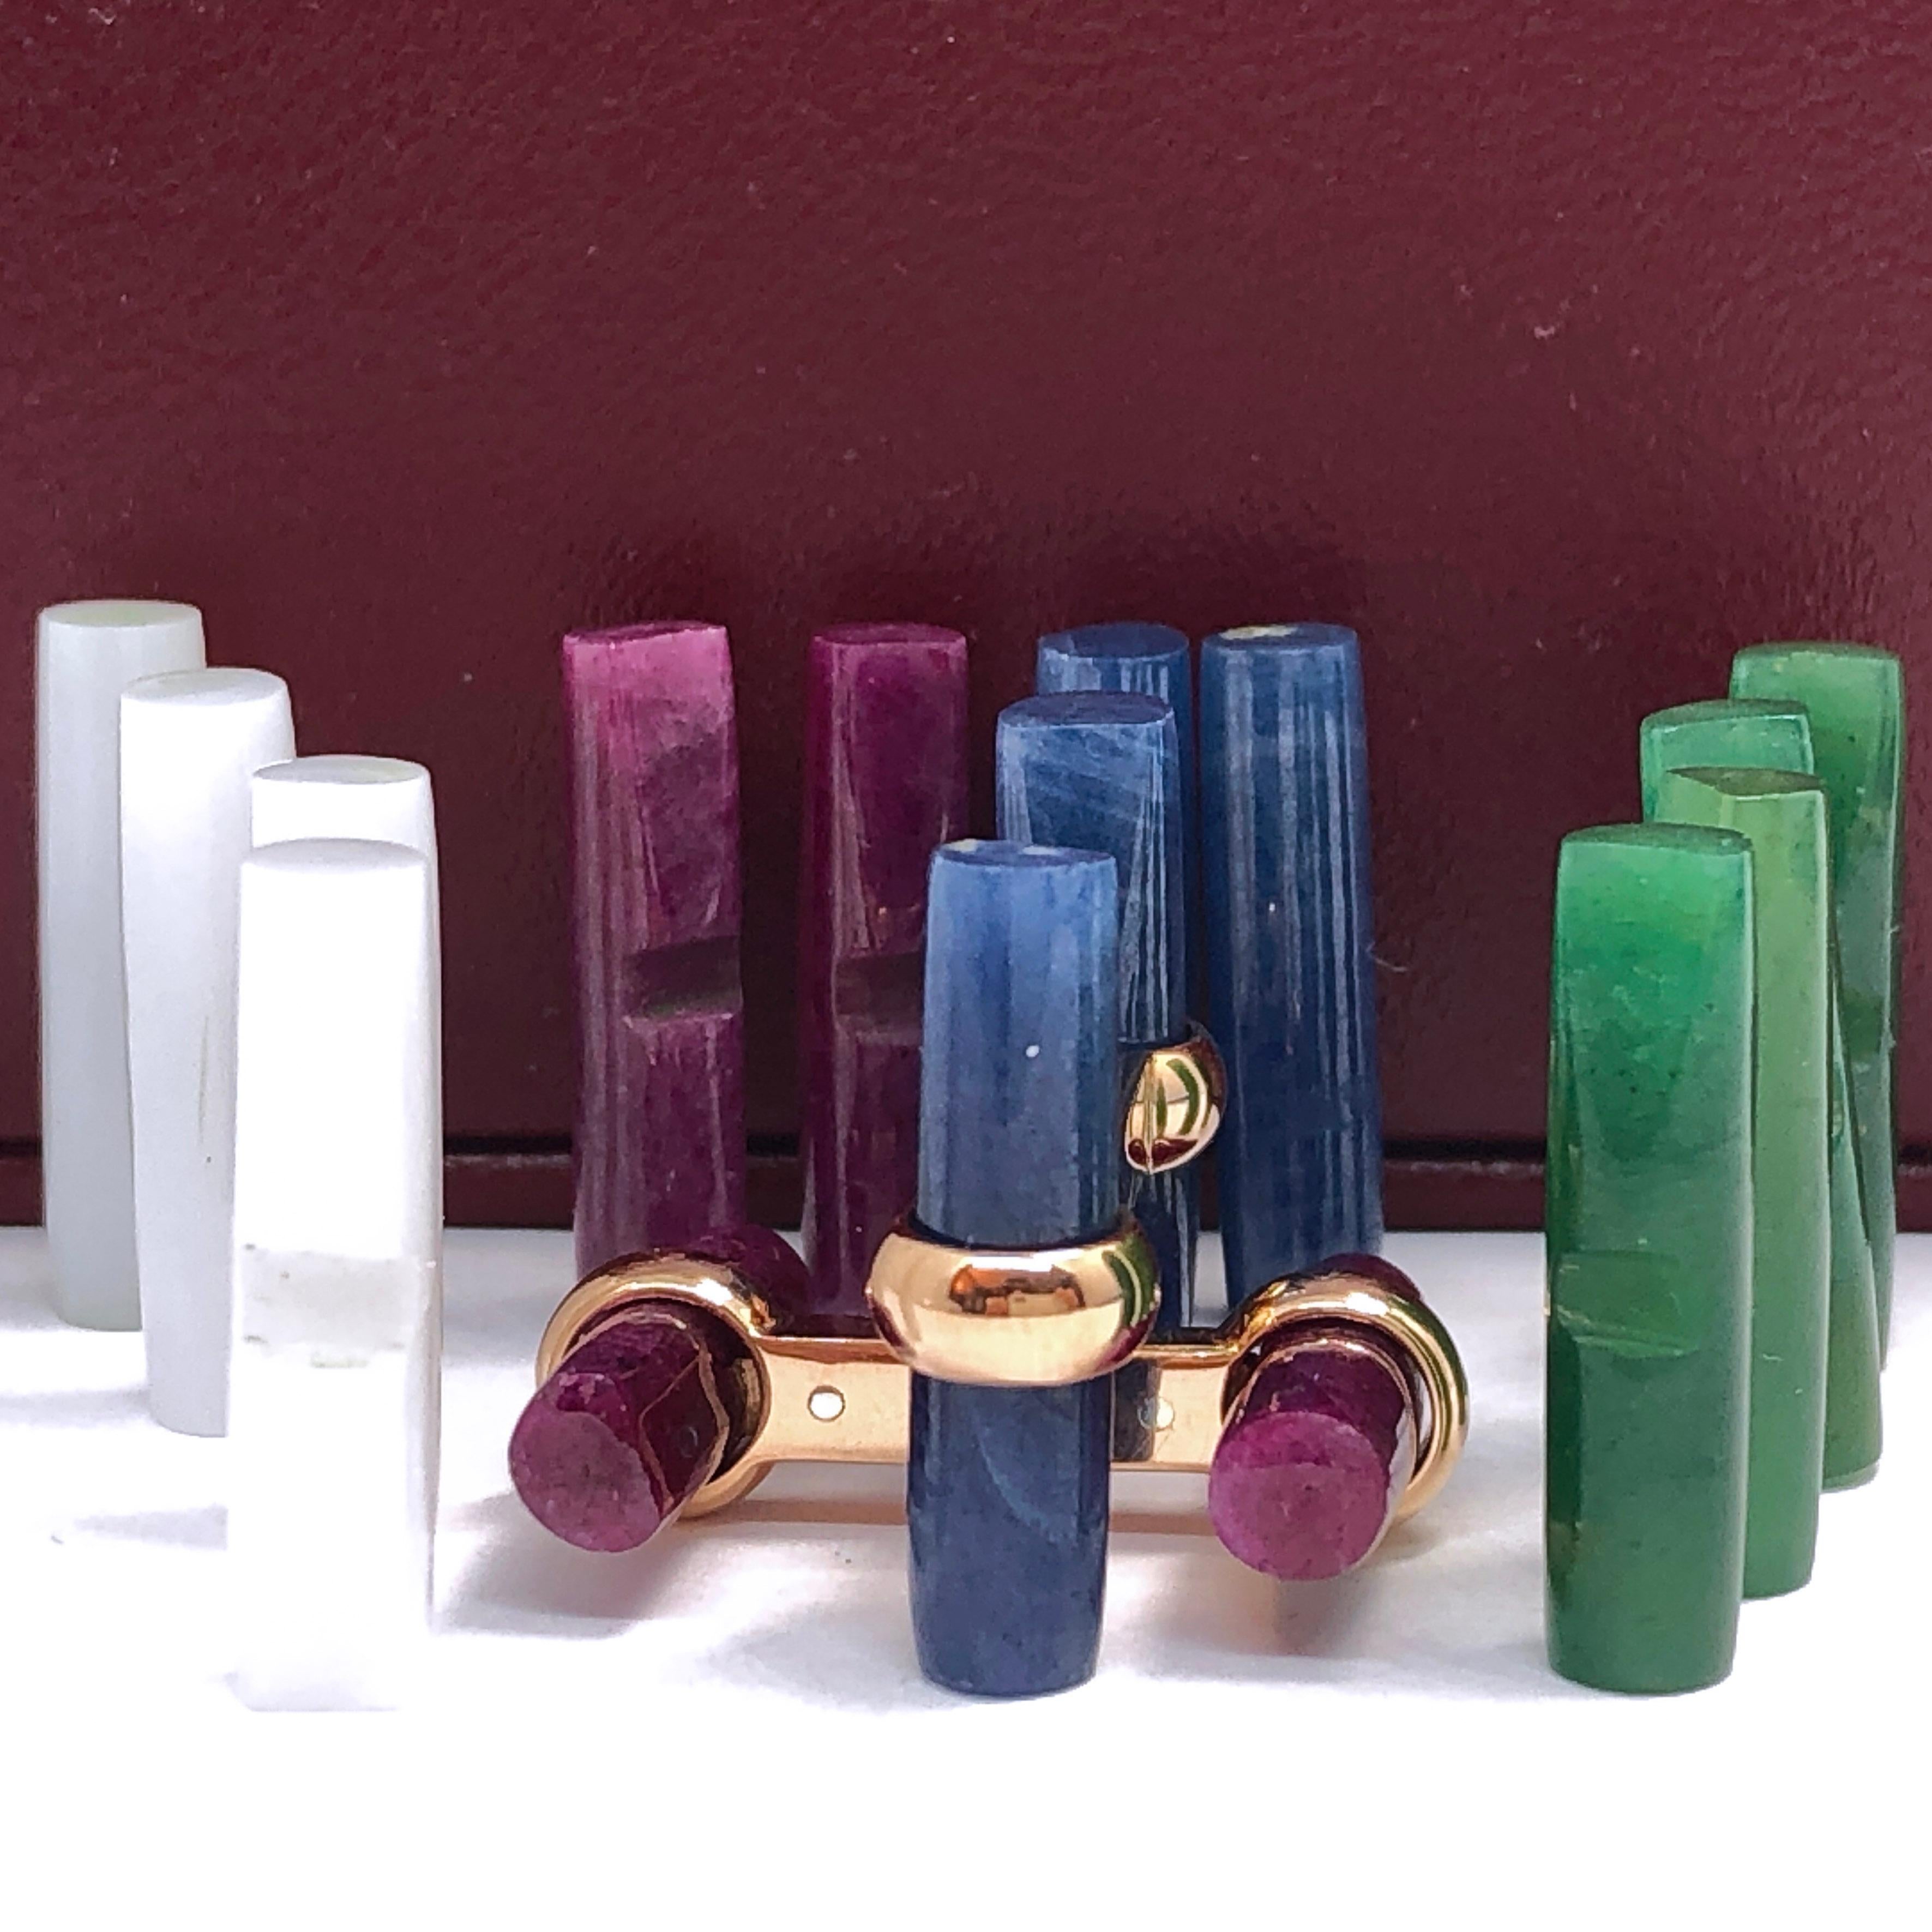 Interchangeable Natural Precious Stones Set Cufflinks featuring 24.13 Kt Natural Blue Sapphire, 24.67Kt Ruby, 16.78Kt Green Jade, 14.5Kt White Opal Hand Inlaid Batons in an  18K Yellow Gold Setting; a fitted Burgundy Leather Case completes this